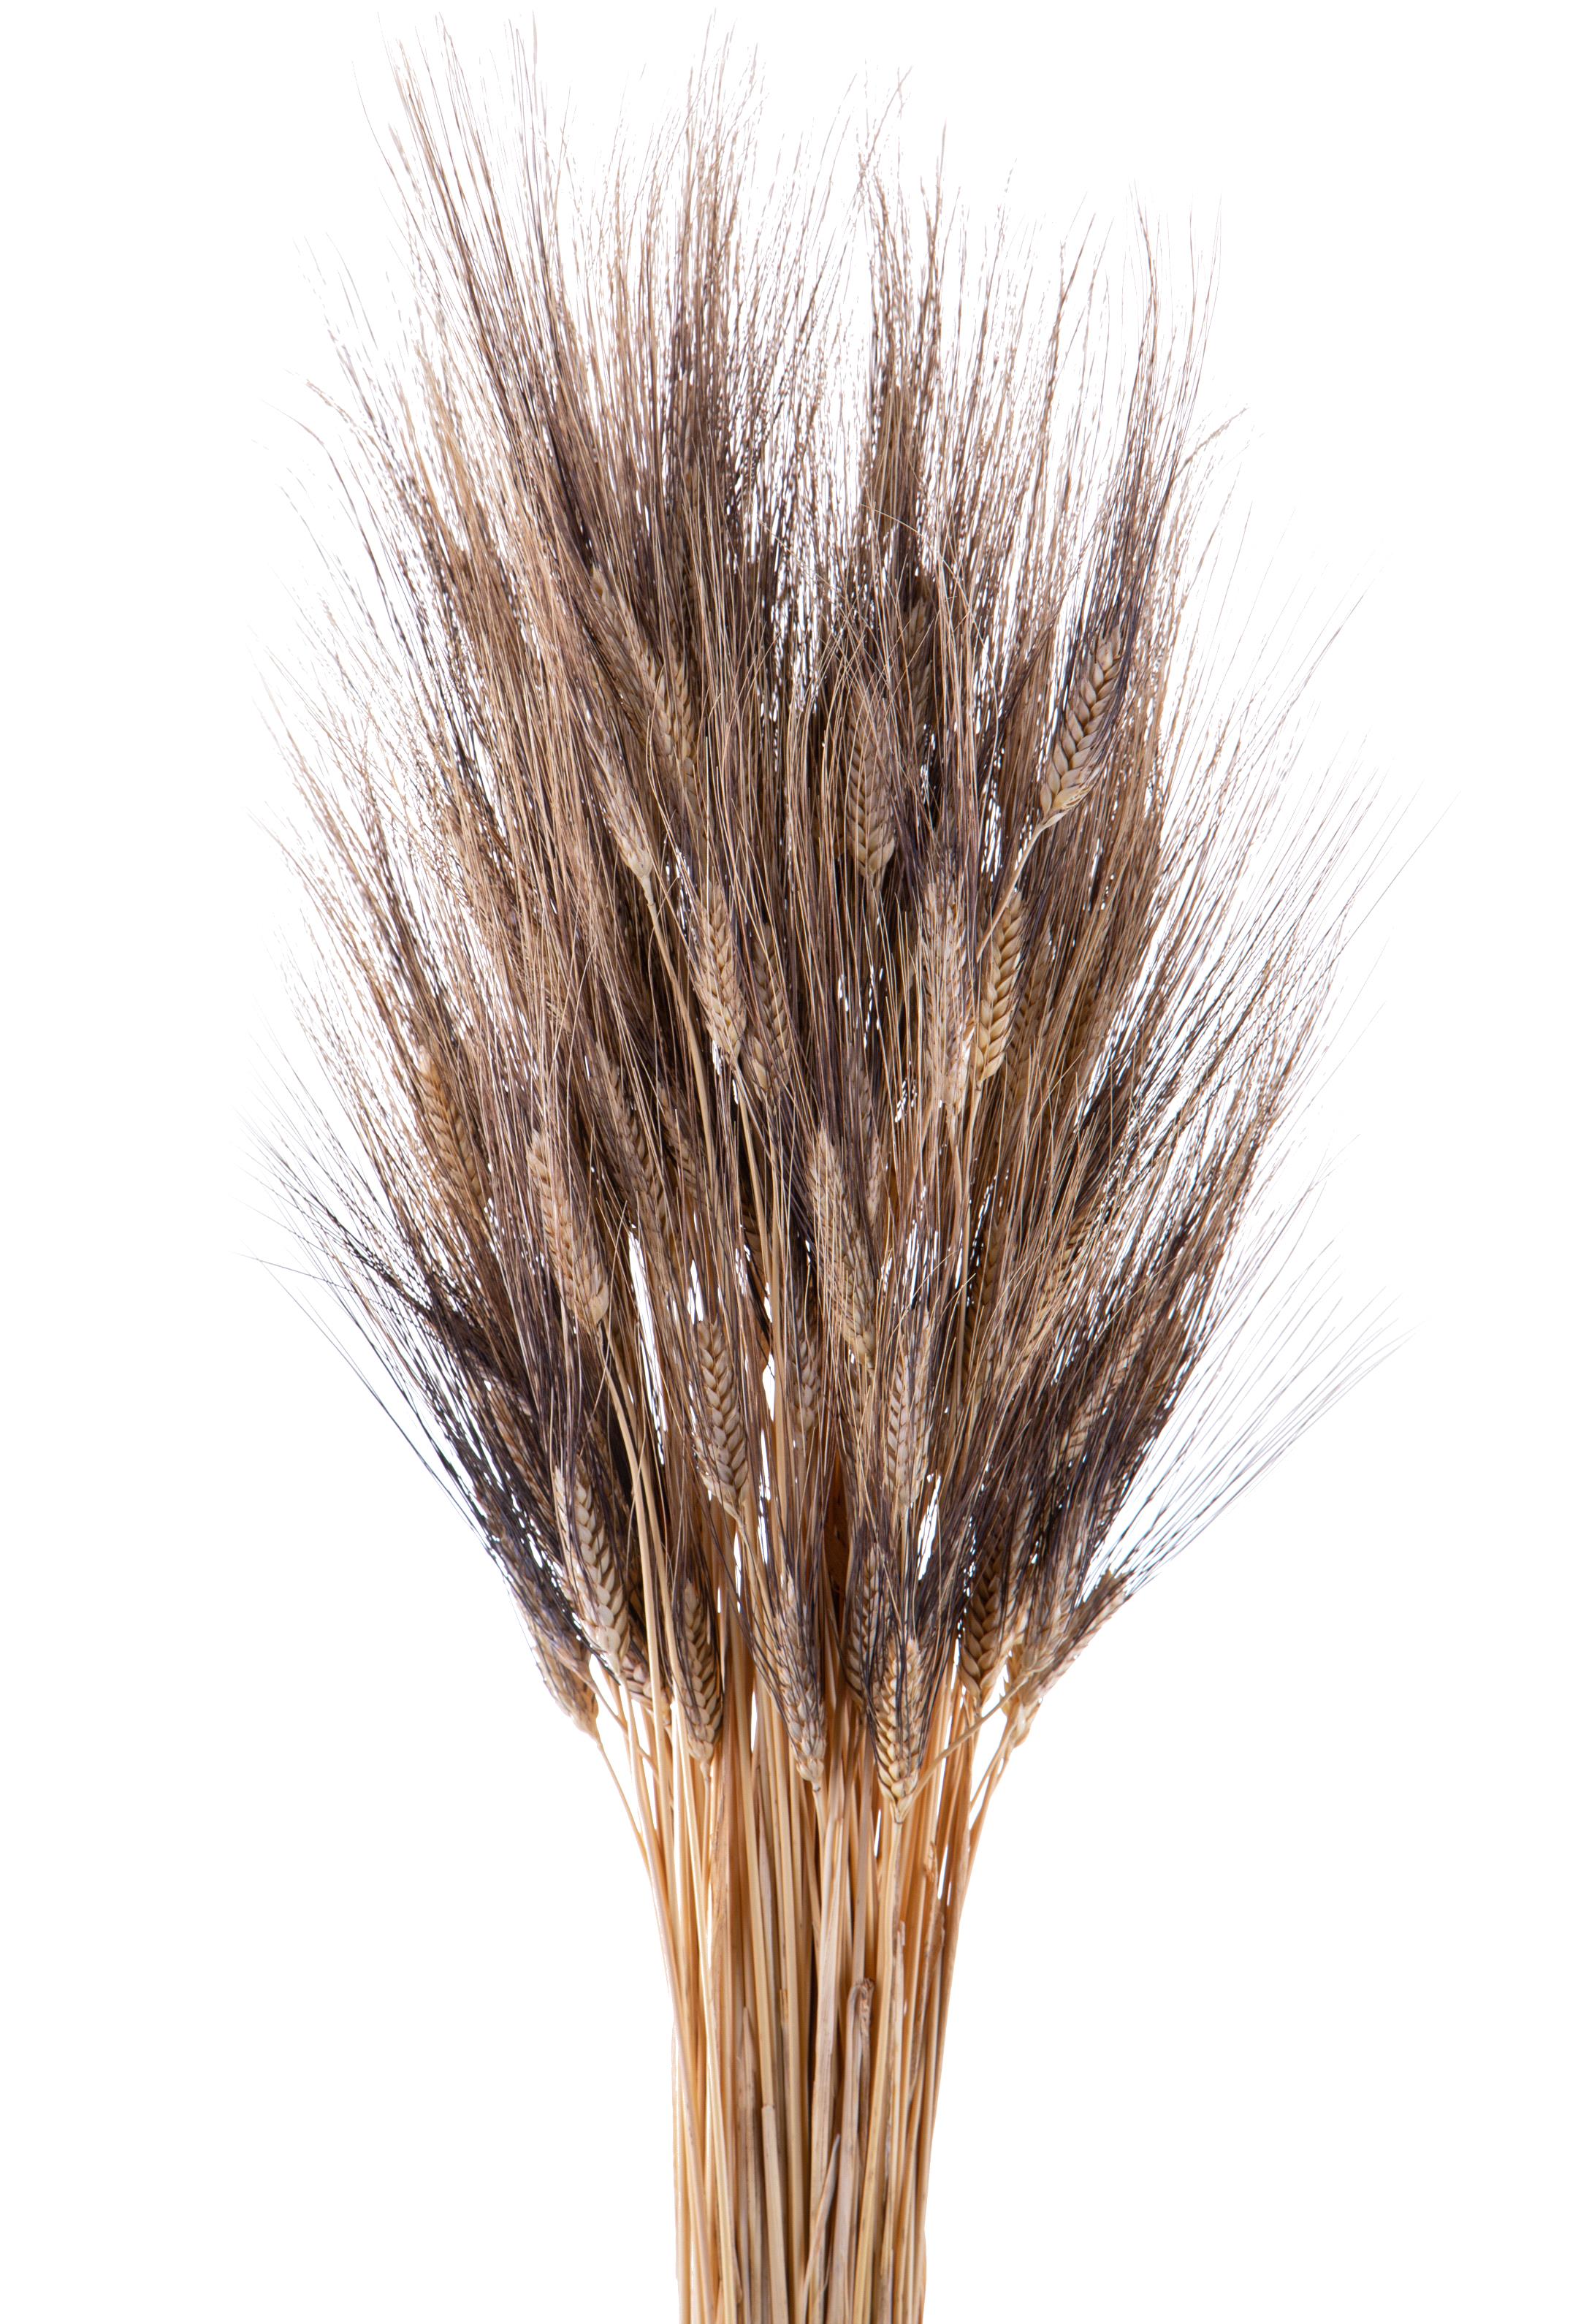 NATURAL PRODUCTS DRIED FLOWERS AND ERBS, NATURAL GRASS, GRANO TRITICUM 100 PZ 90 CM BF/NERO SAC